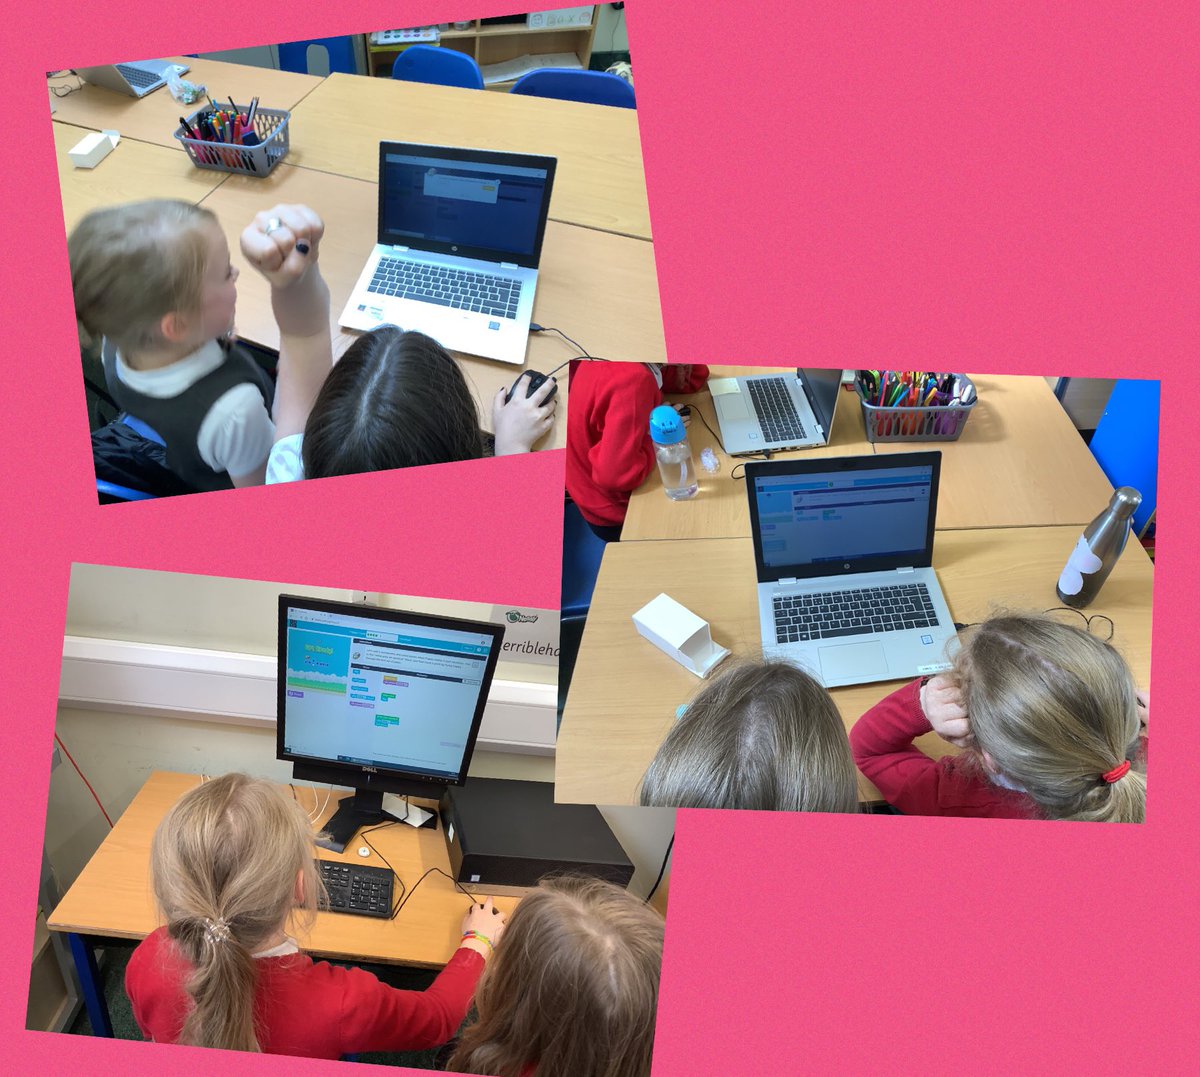 At Girls’ Coding Club this week, we took part in Hour of Code to create a game. We learned all about blocks of code and had to do a lot of debugging and tinkering to reach the next stage. Excellent work, girls! #shecancode #techshecan